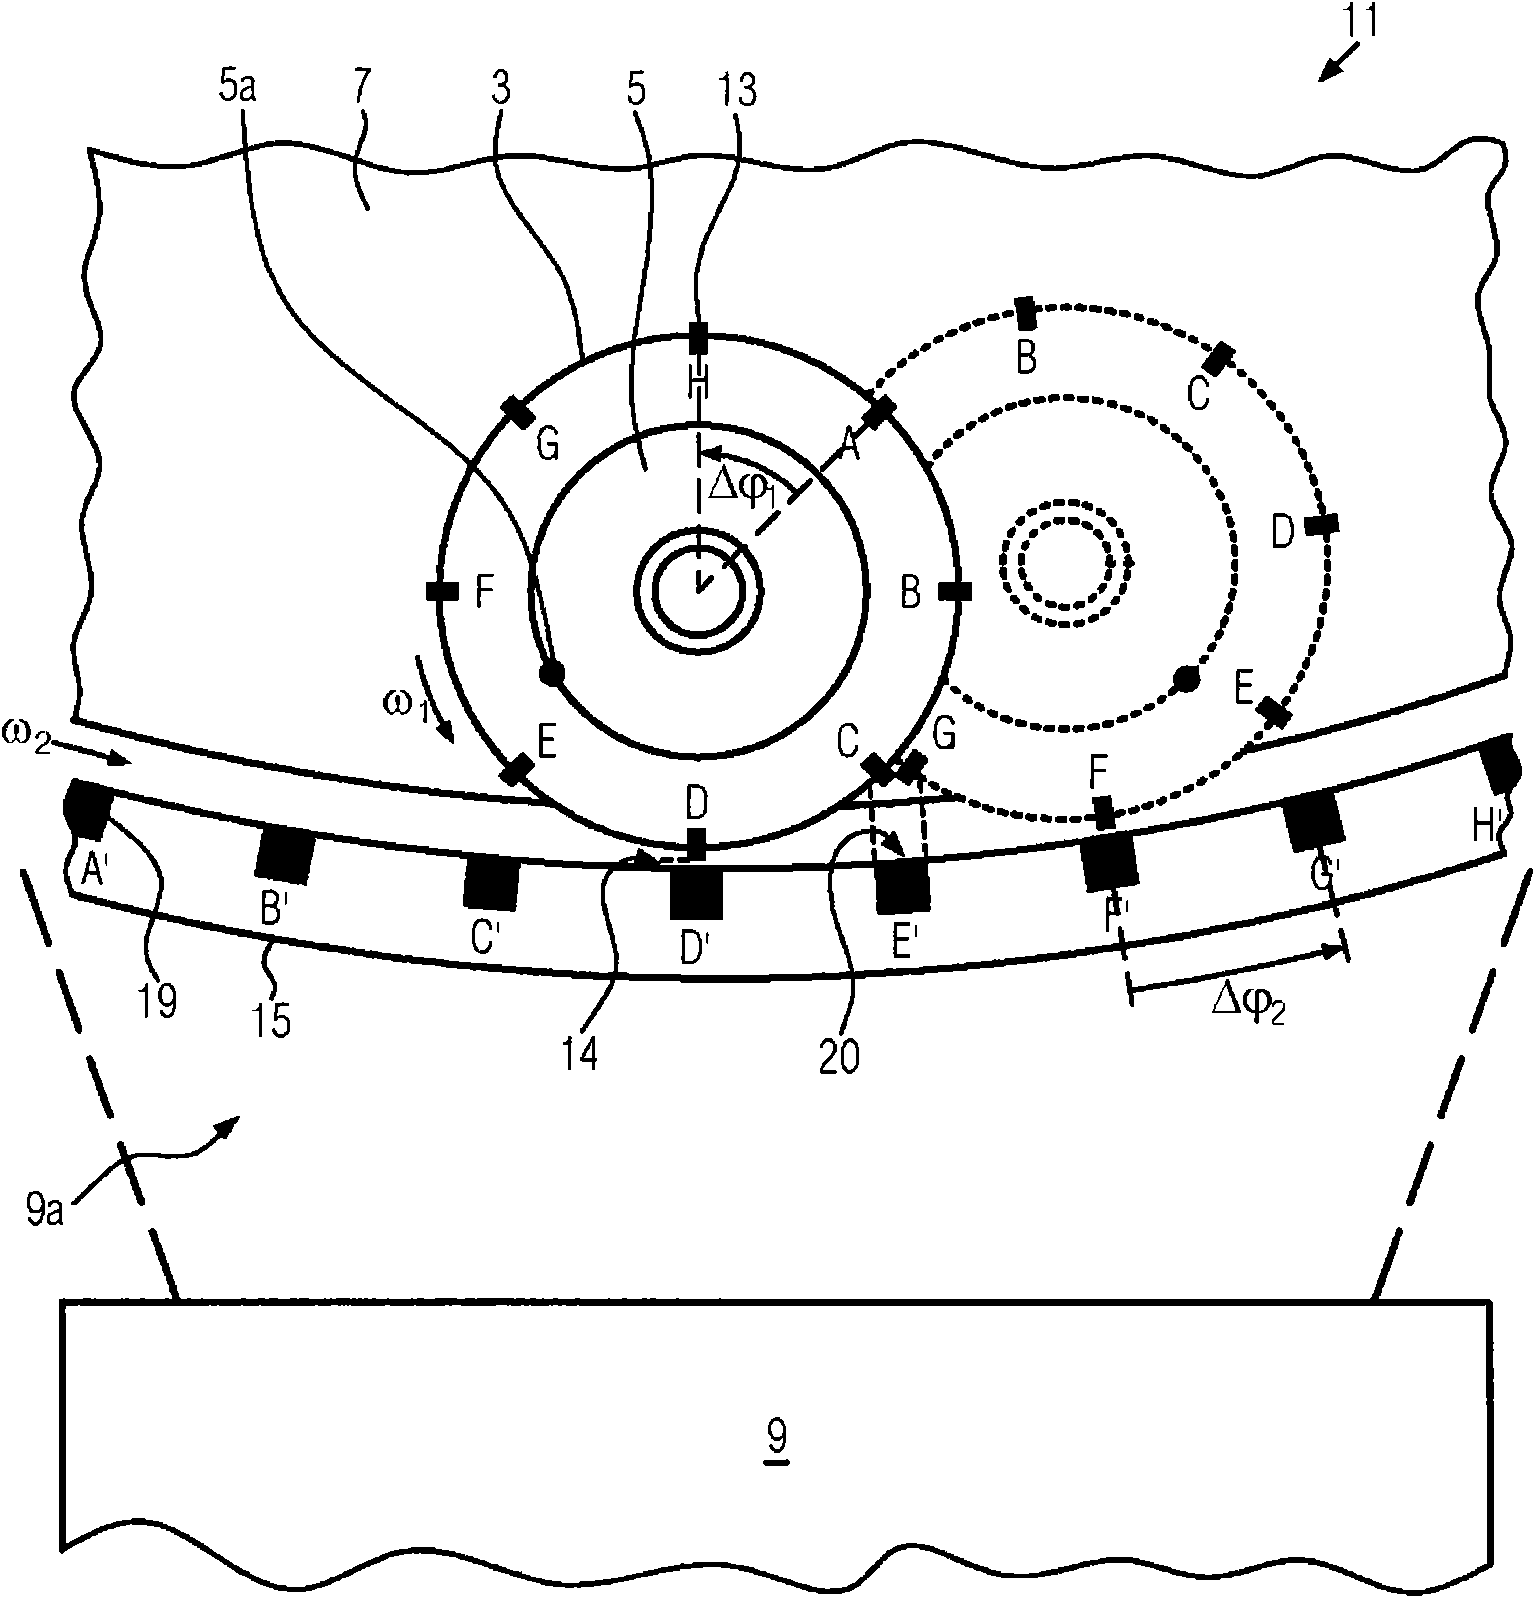 Device and method for aligning containers, in particular bottles, in a labelling machine